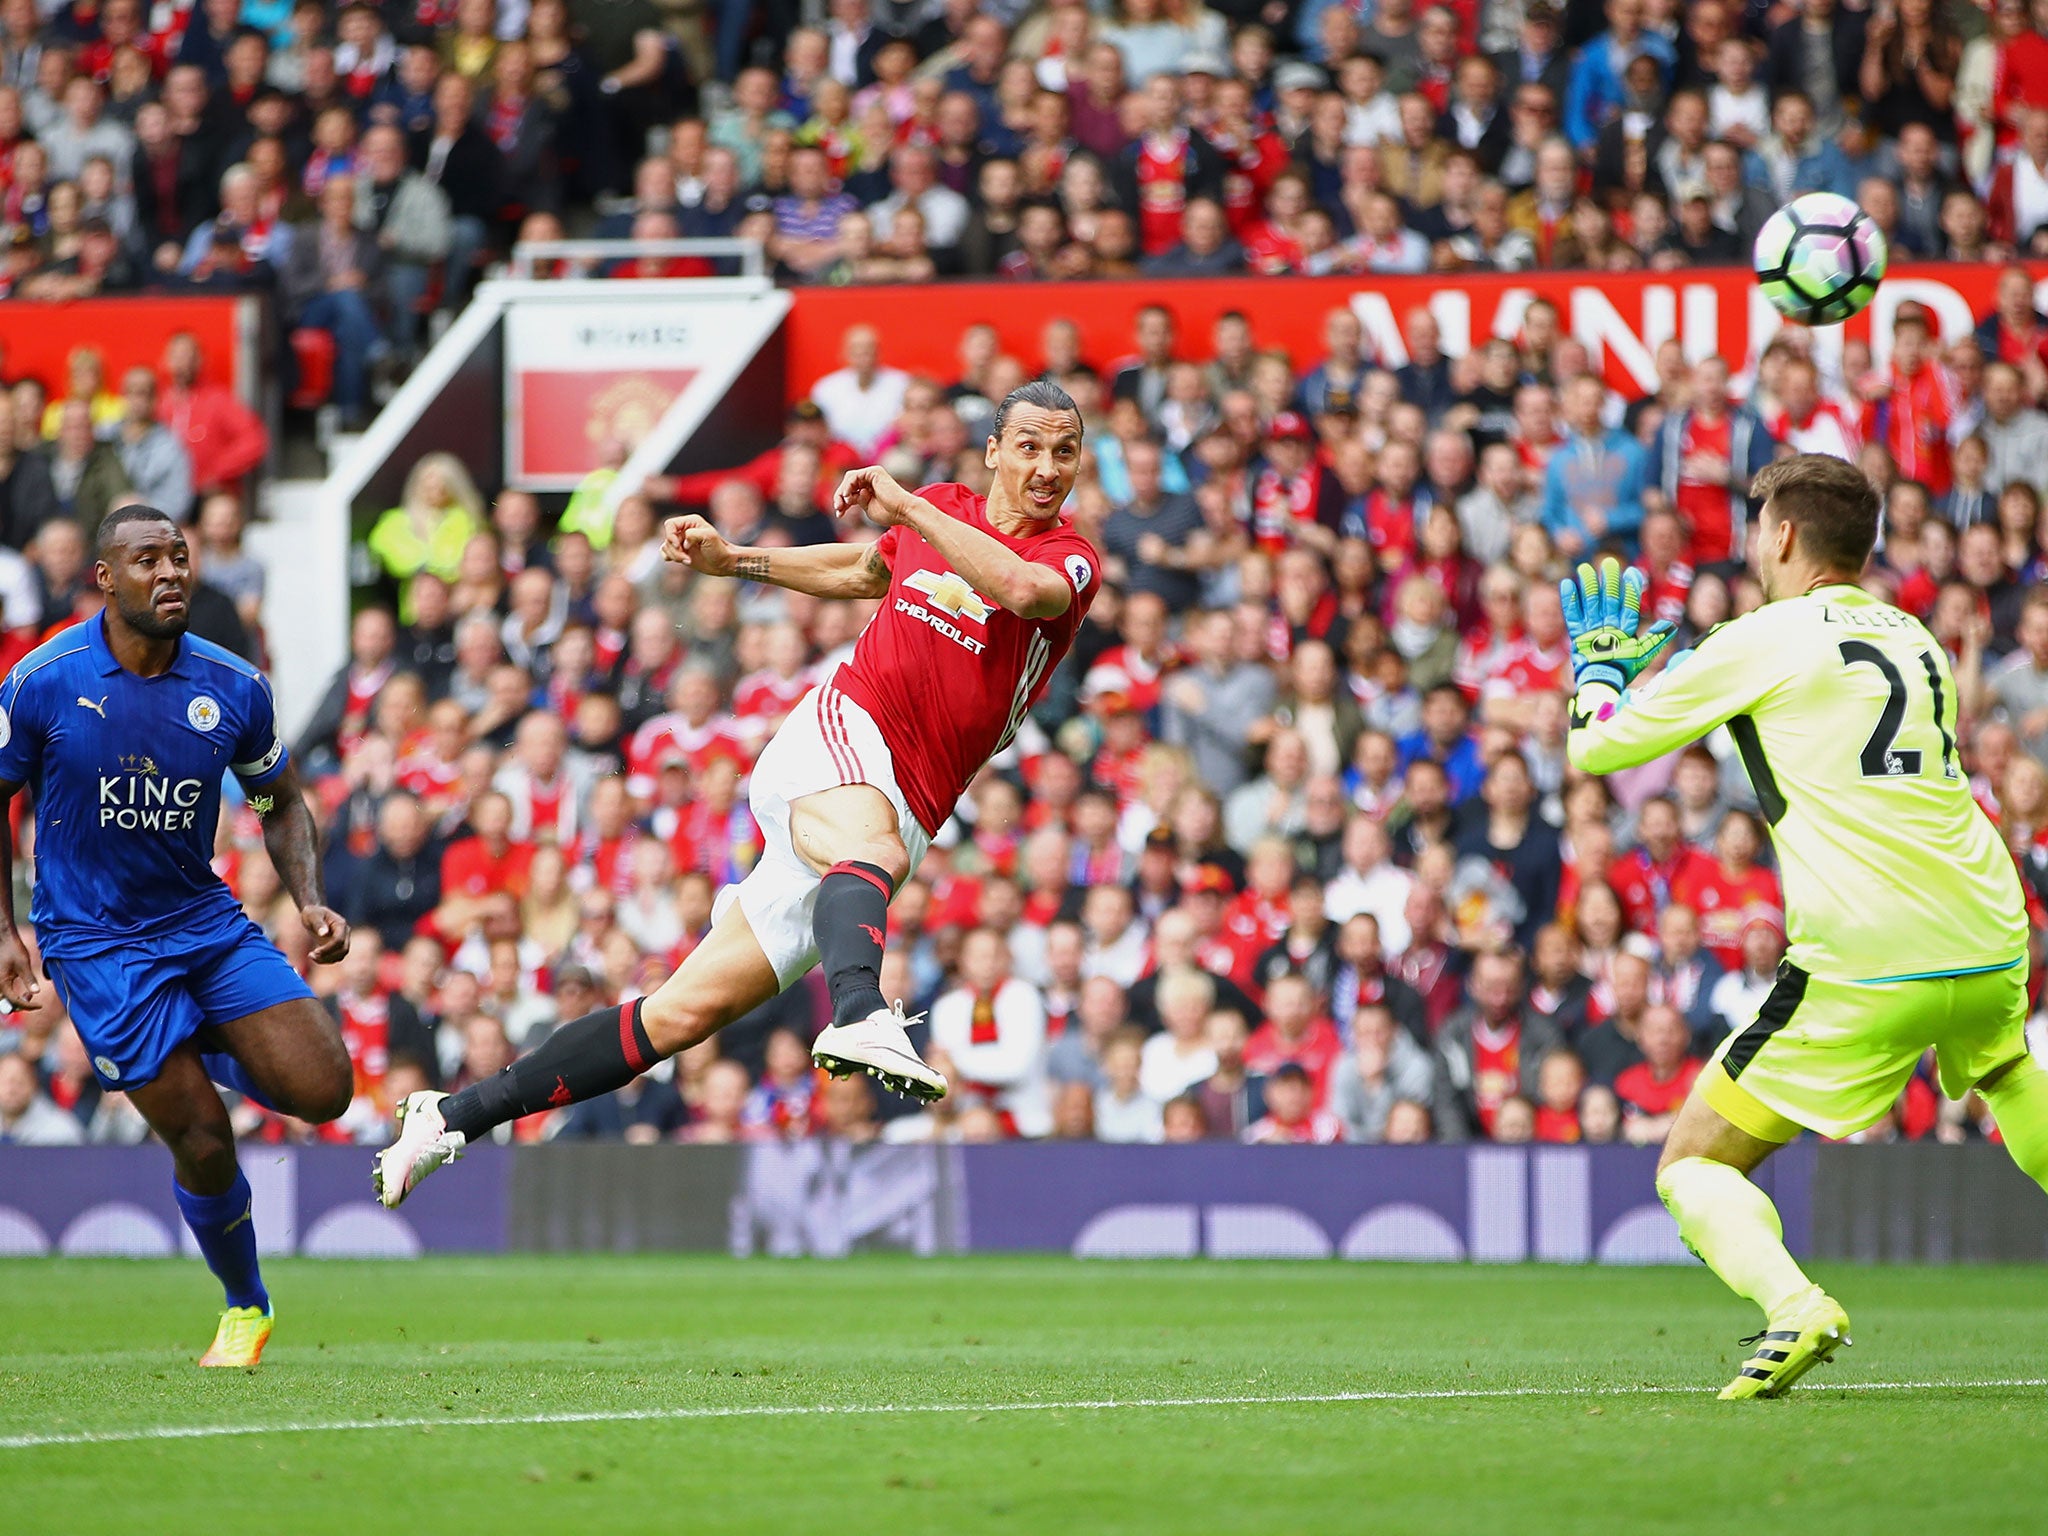 Manchester United's Zlatan Ibrahimovic scores against Leicester